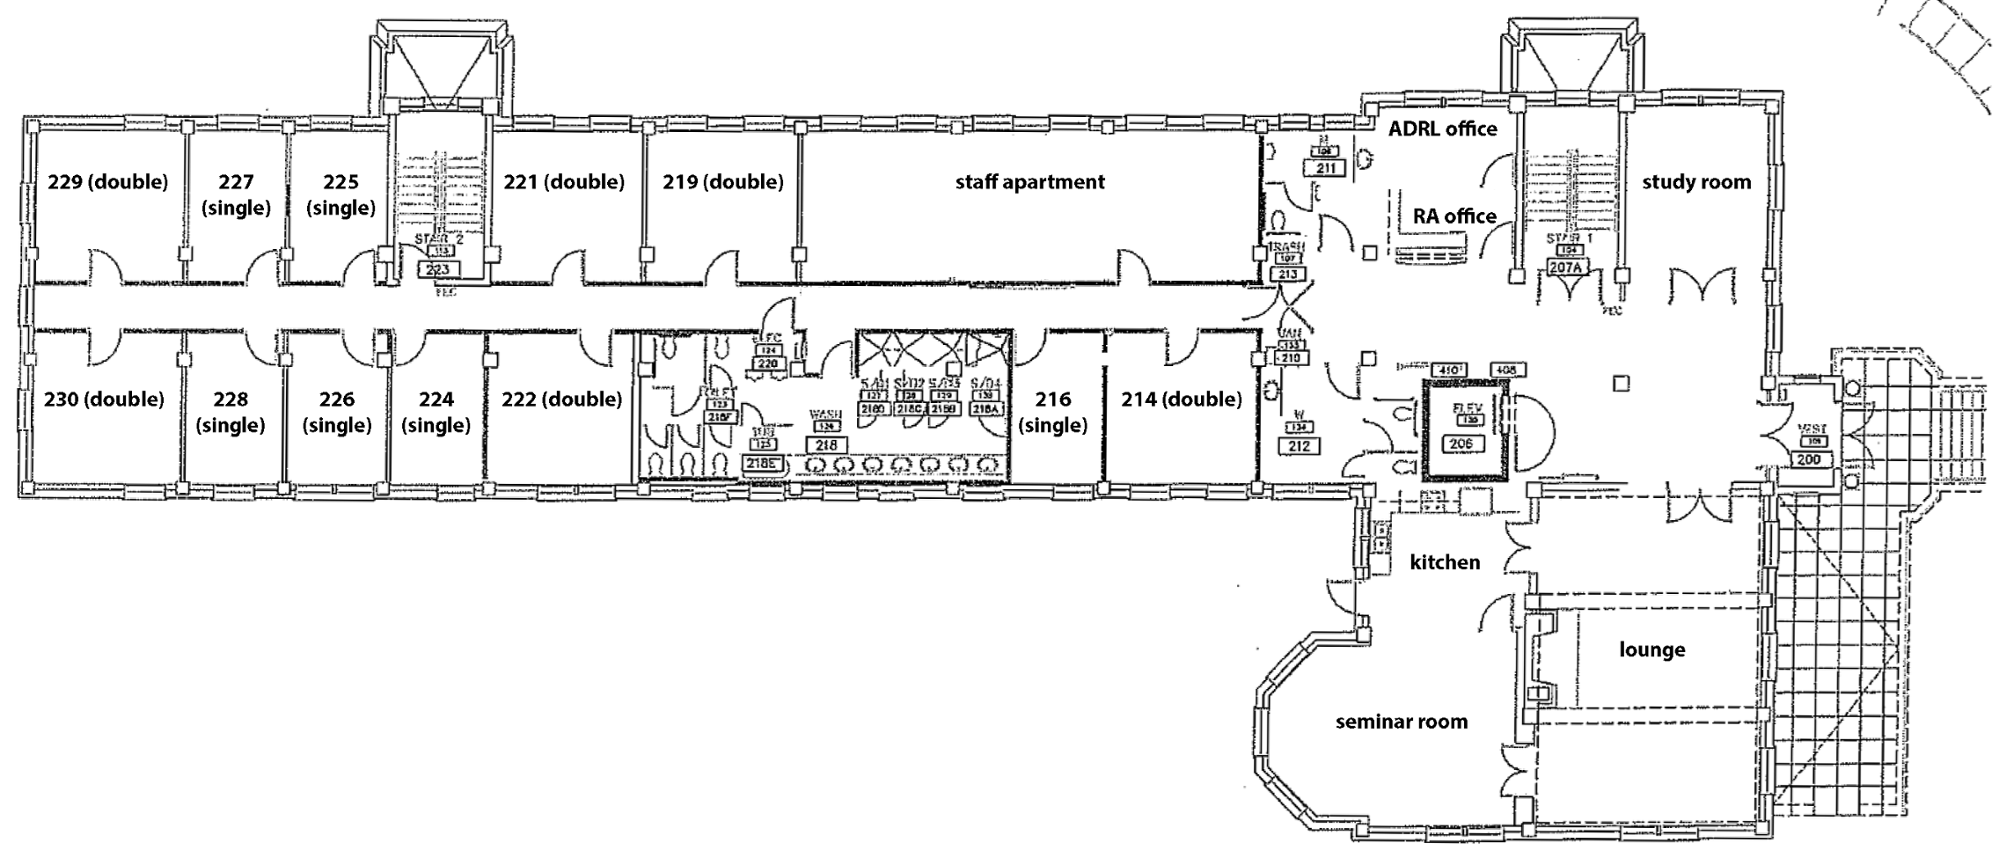 Ford hall smith college floor plan